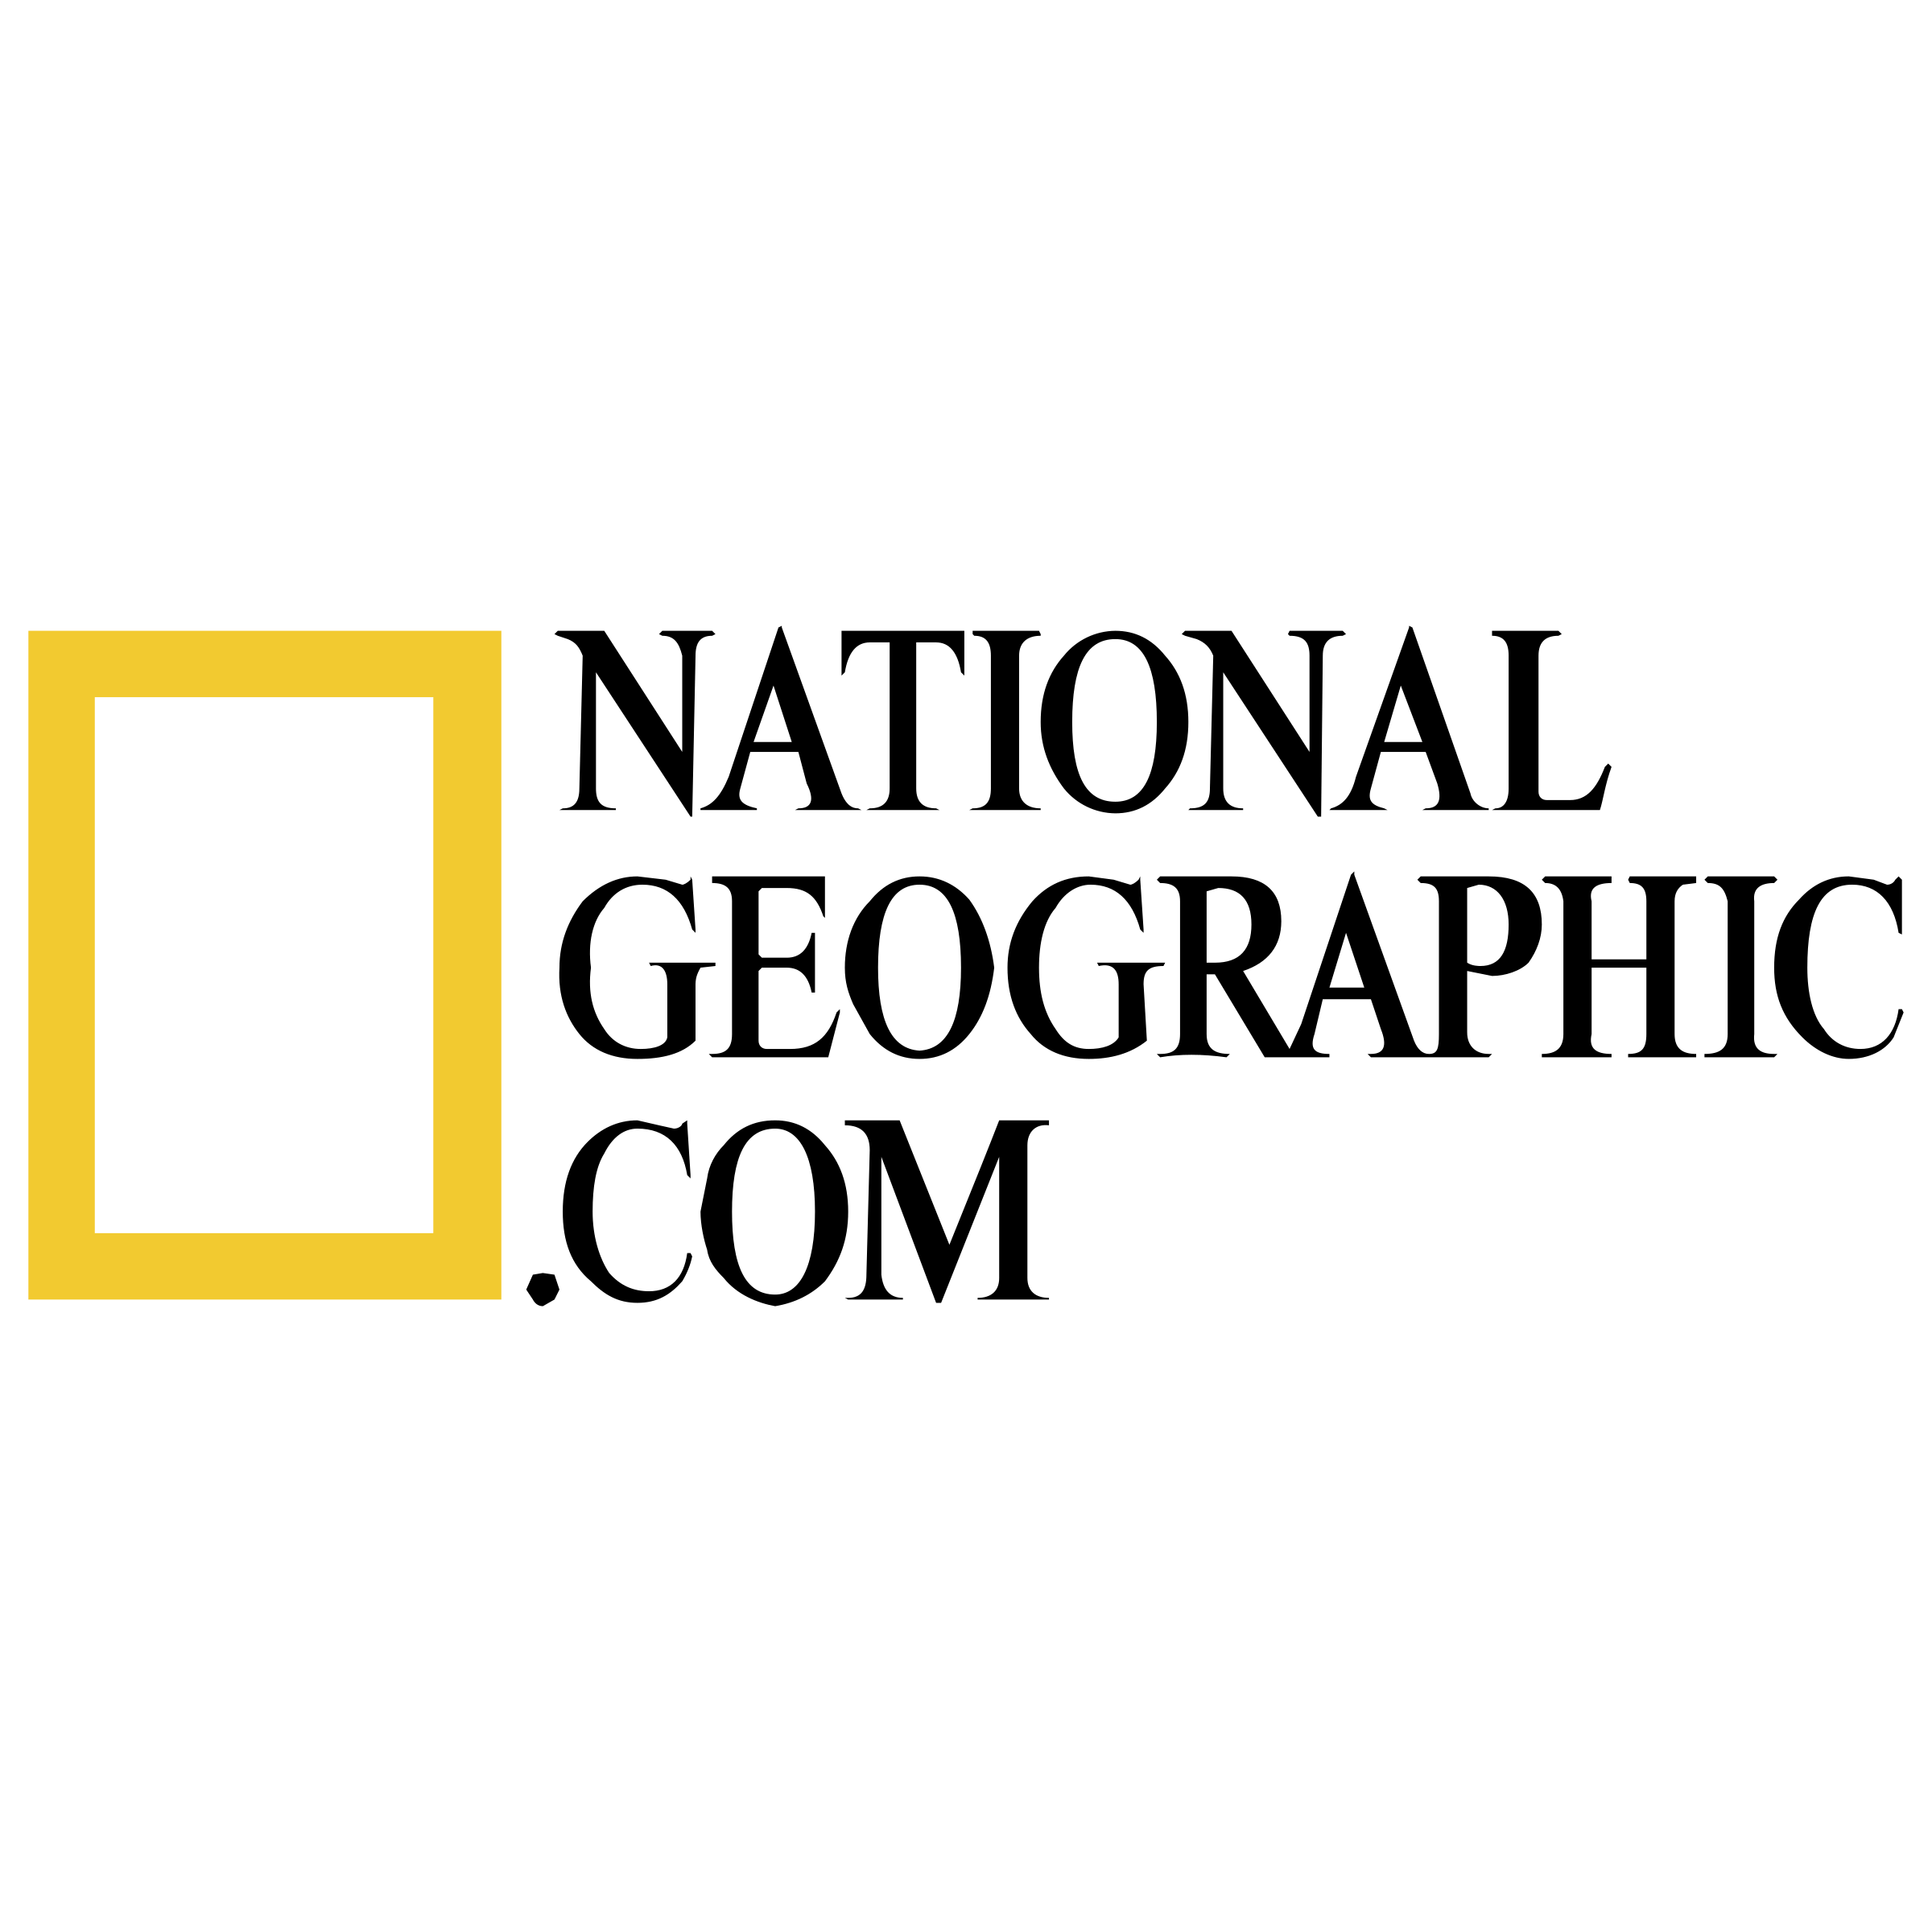 Nationalgeographic.com Logo - National Geographic Society Logo PNG Transparent & SVG Vector ...